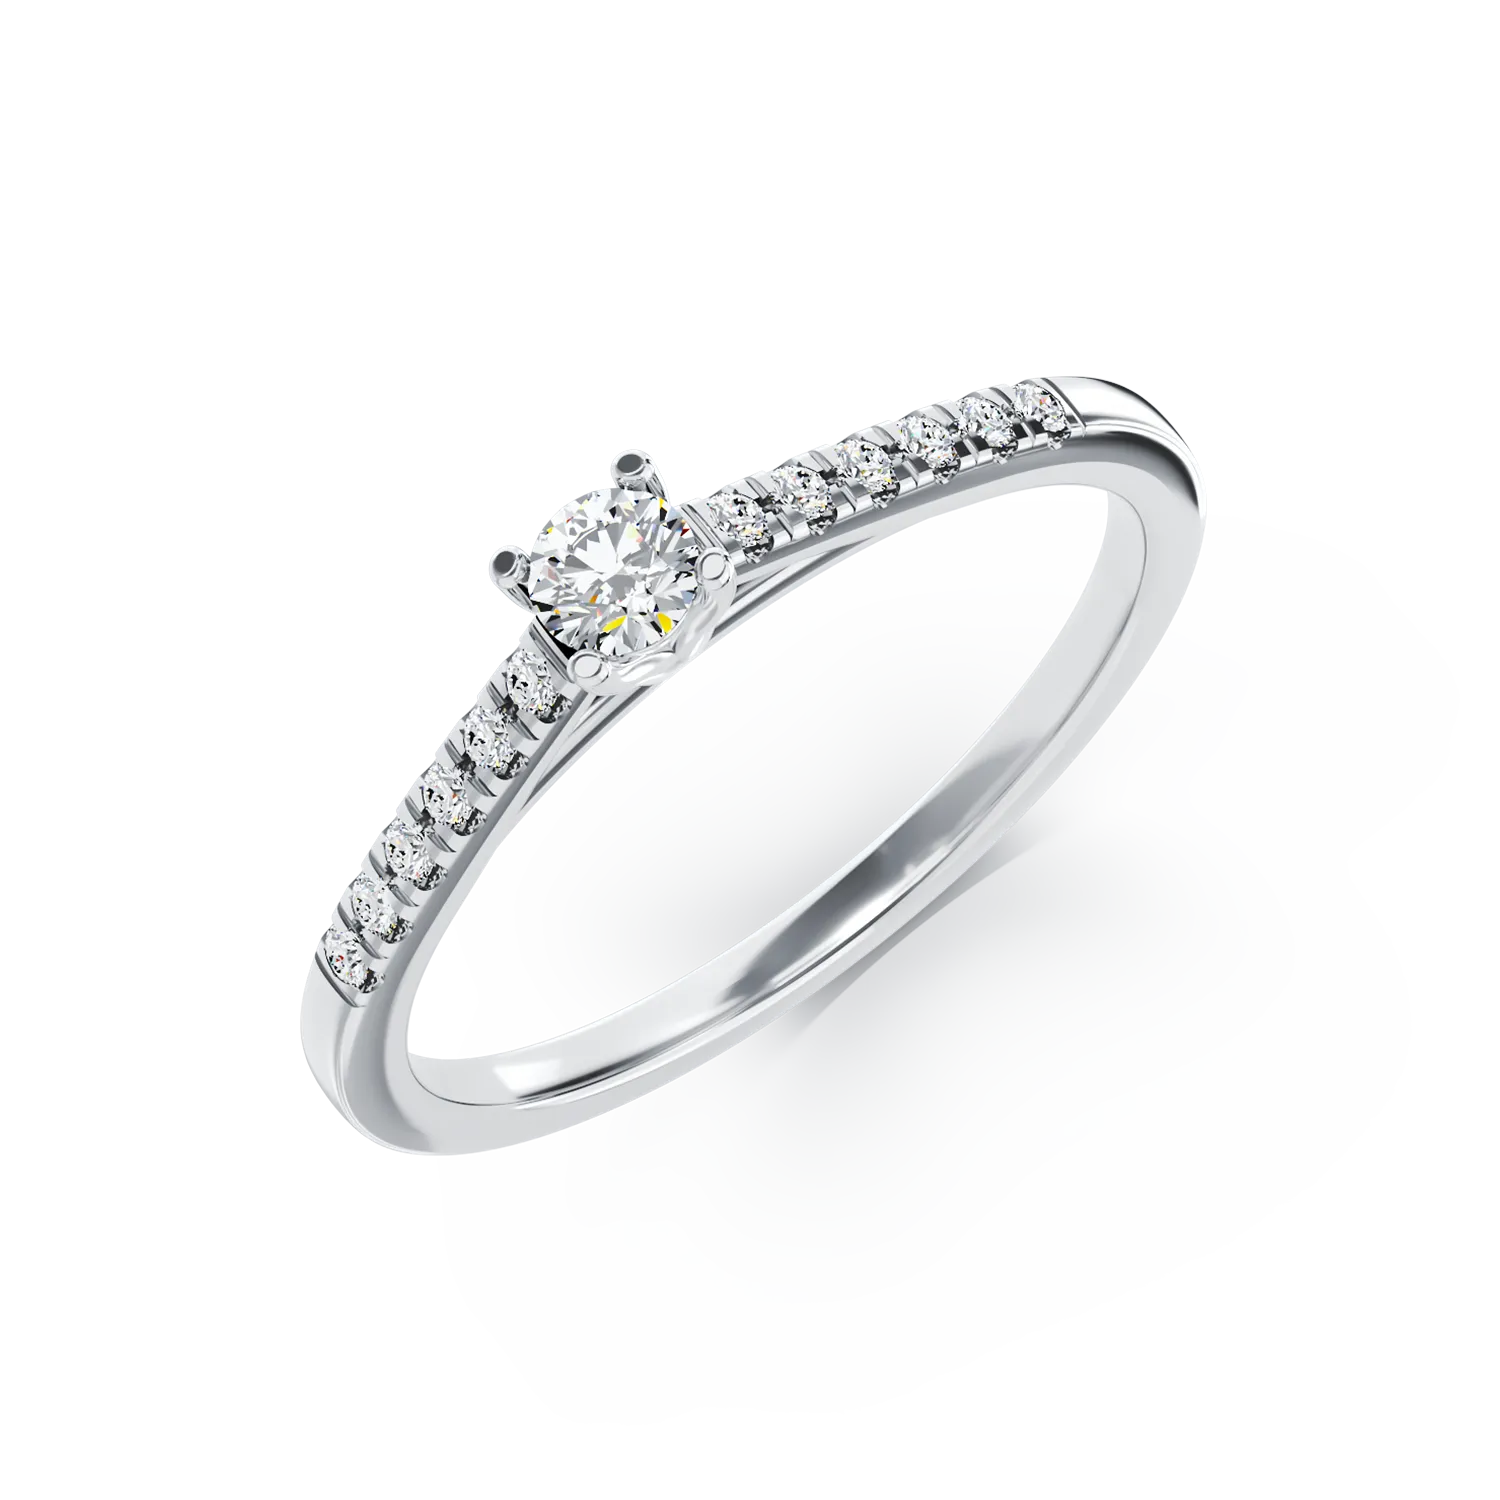 18K white gold engagement ring with 0.265ct diamond and 0.125ct diamonds